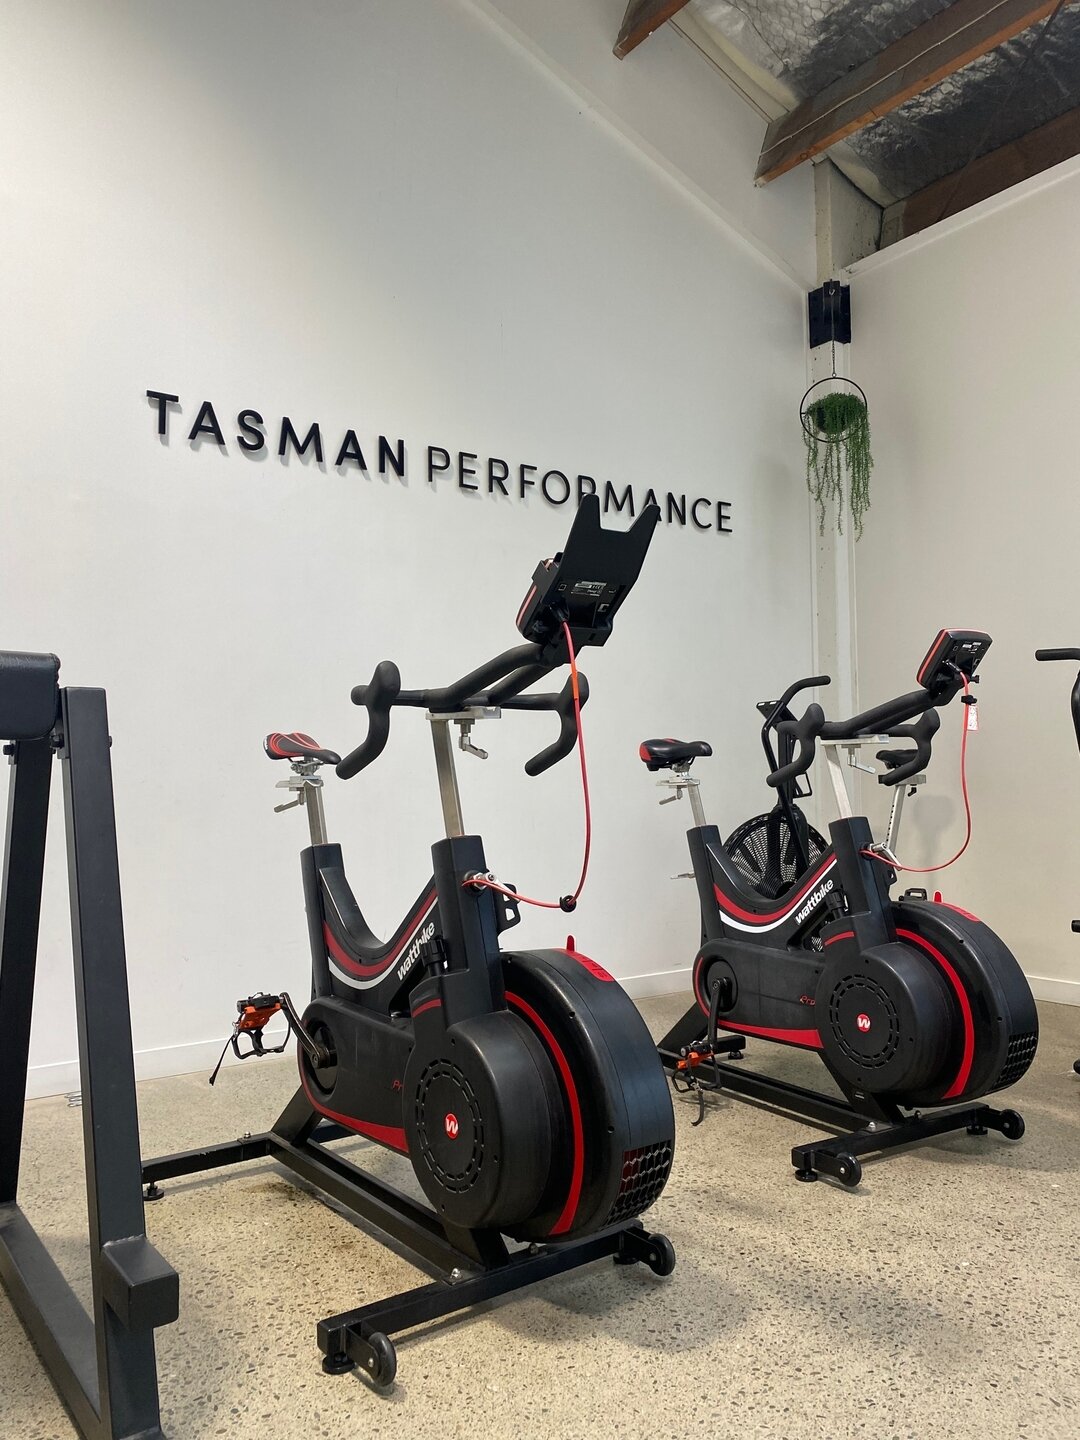 Who&rsquo;s ready to tackle the 1000 meter Wattbike Challenge! 🌶️ ​​​​​​​​
​​​​​​​​
Get involved &amp; Post your times below 👇 ​​​​​​​​
​​​​​​​​
@tasmanperformance